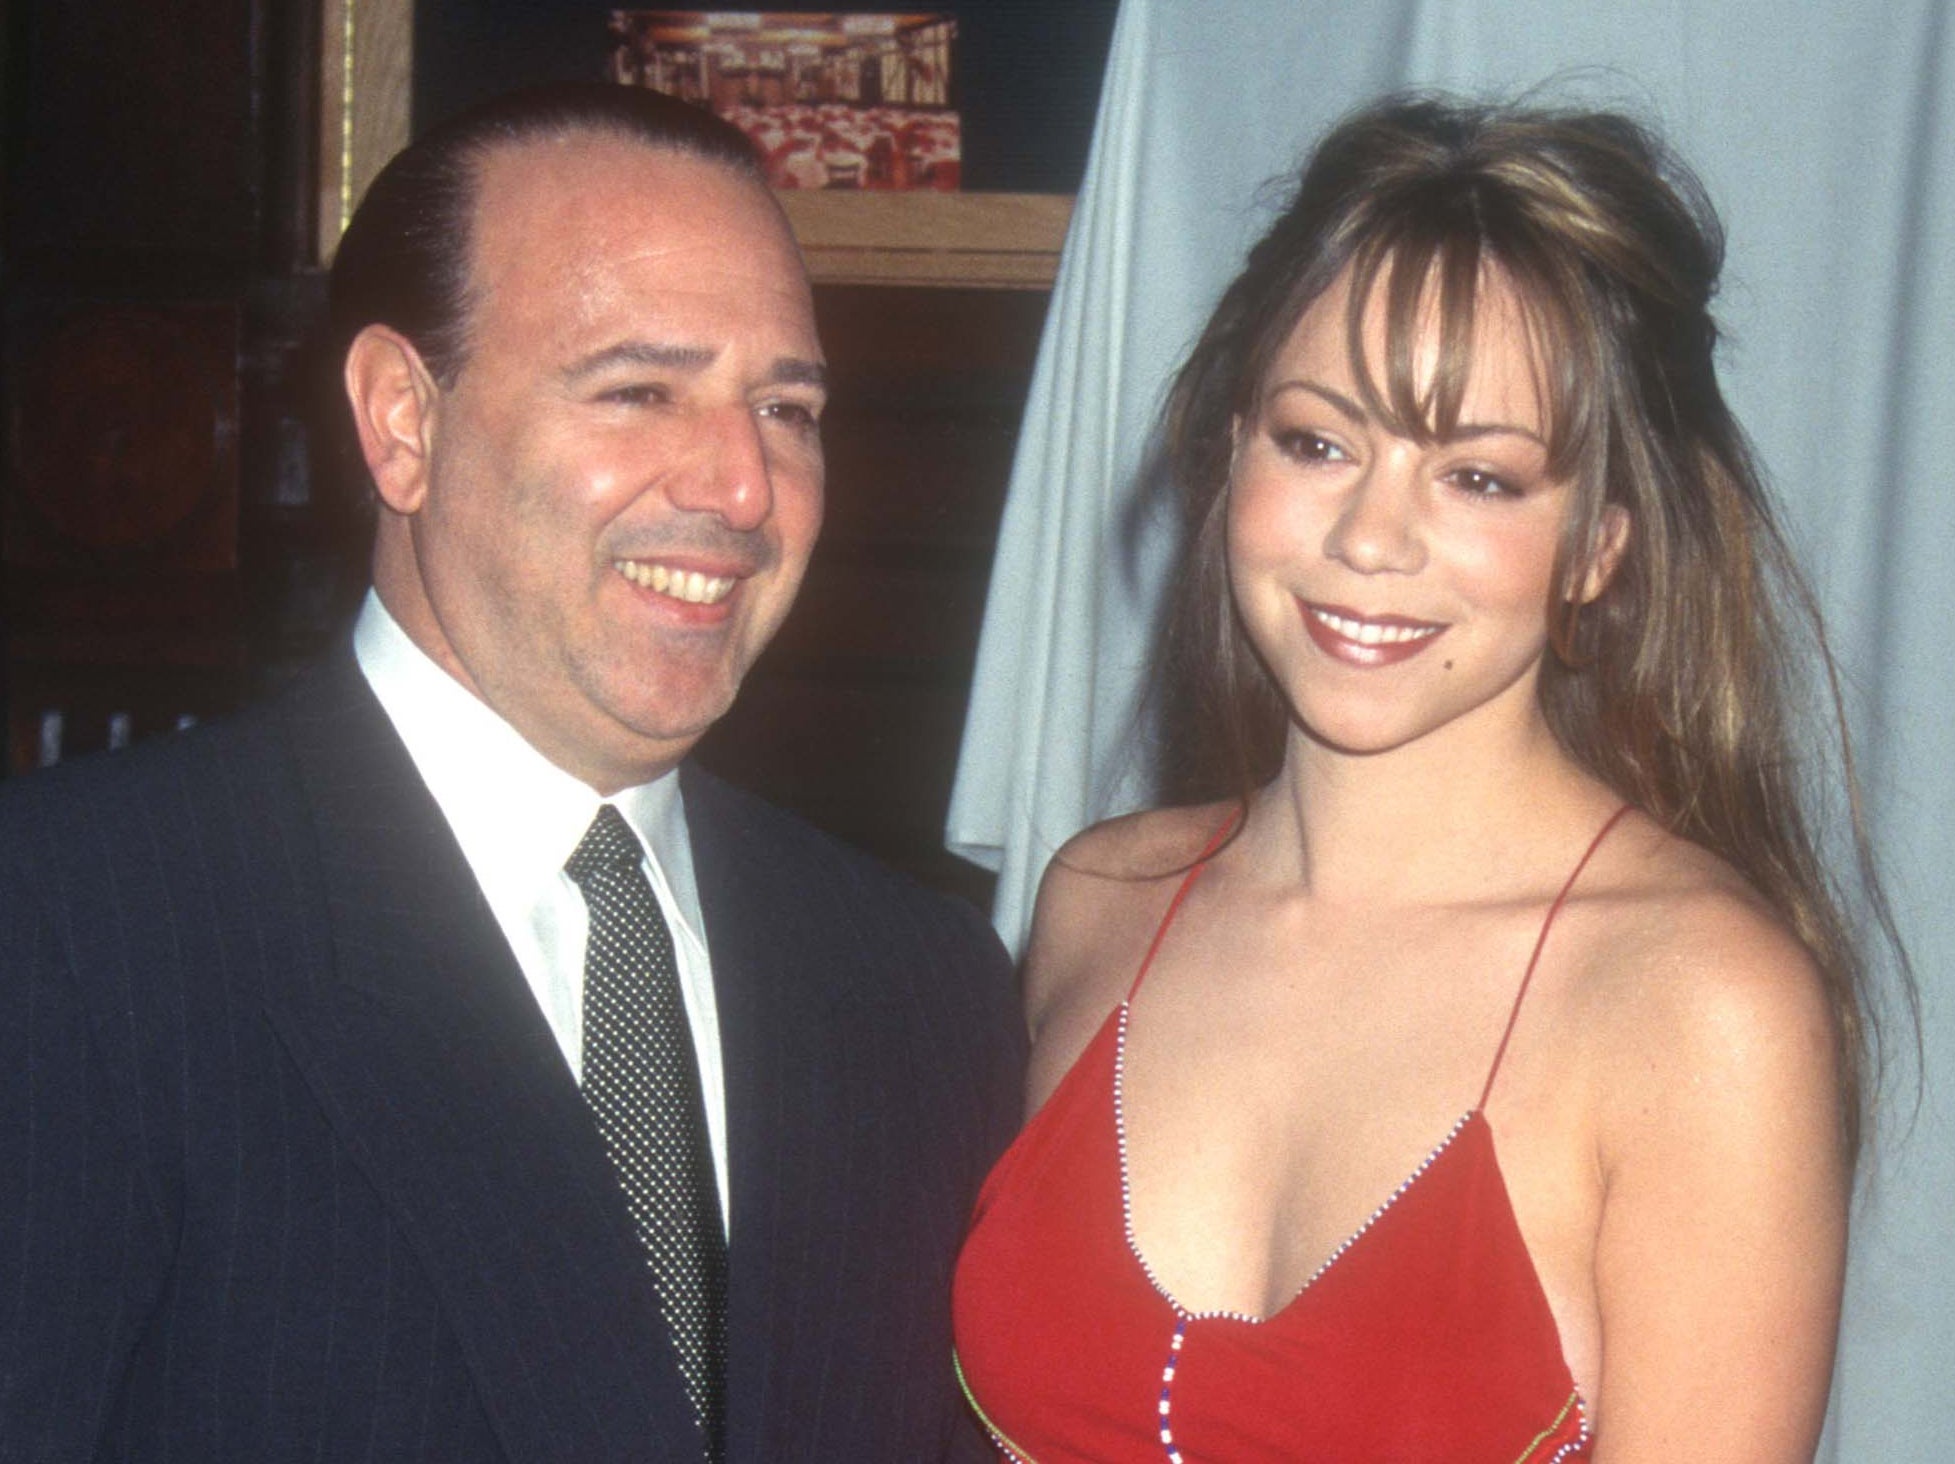 Tommy Mottola and Mariah Carey